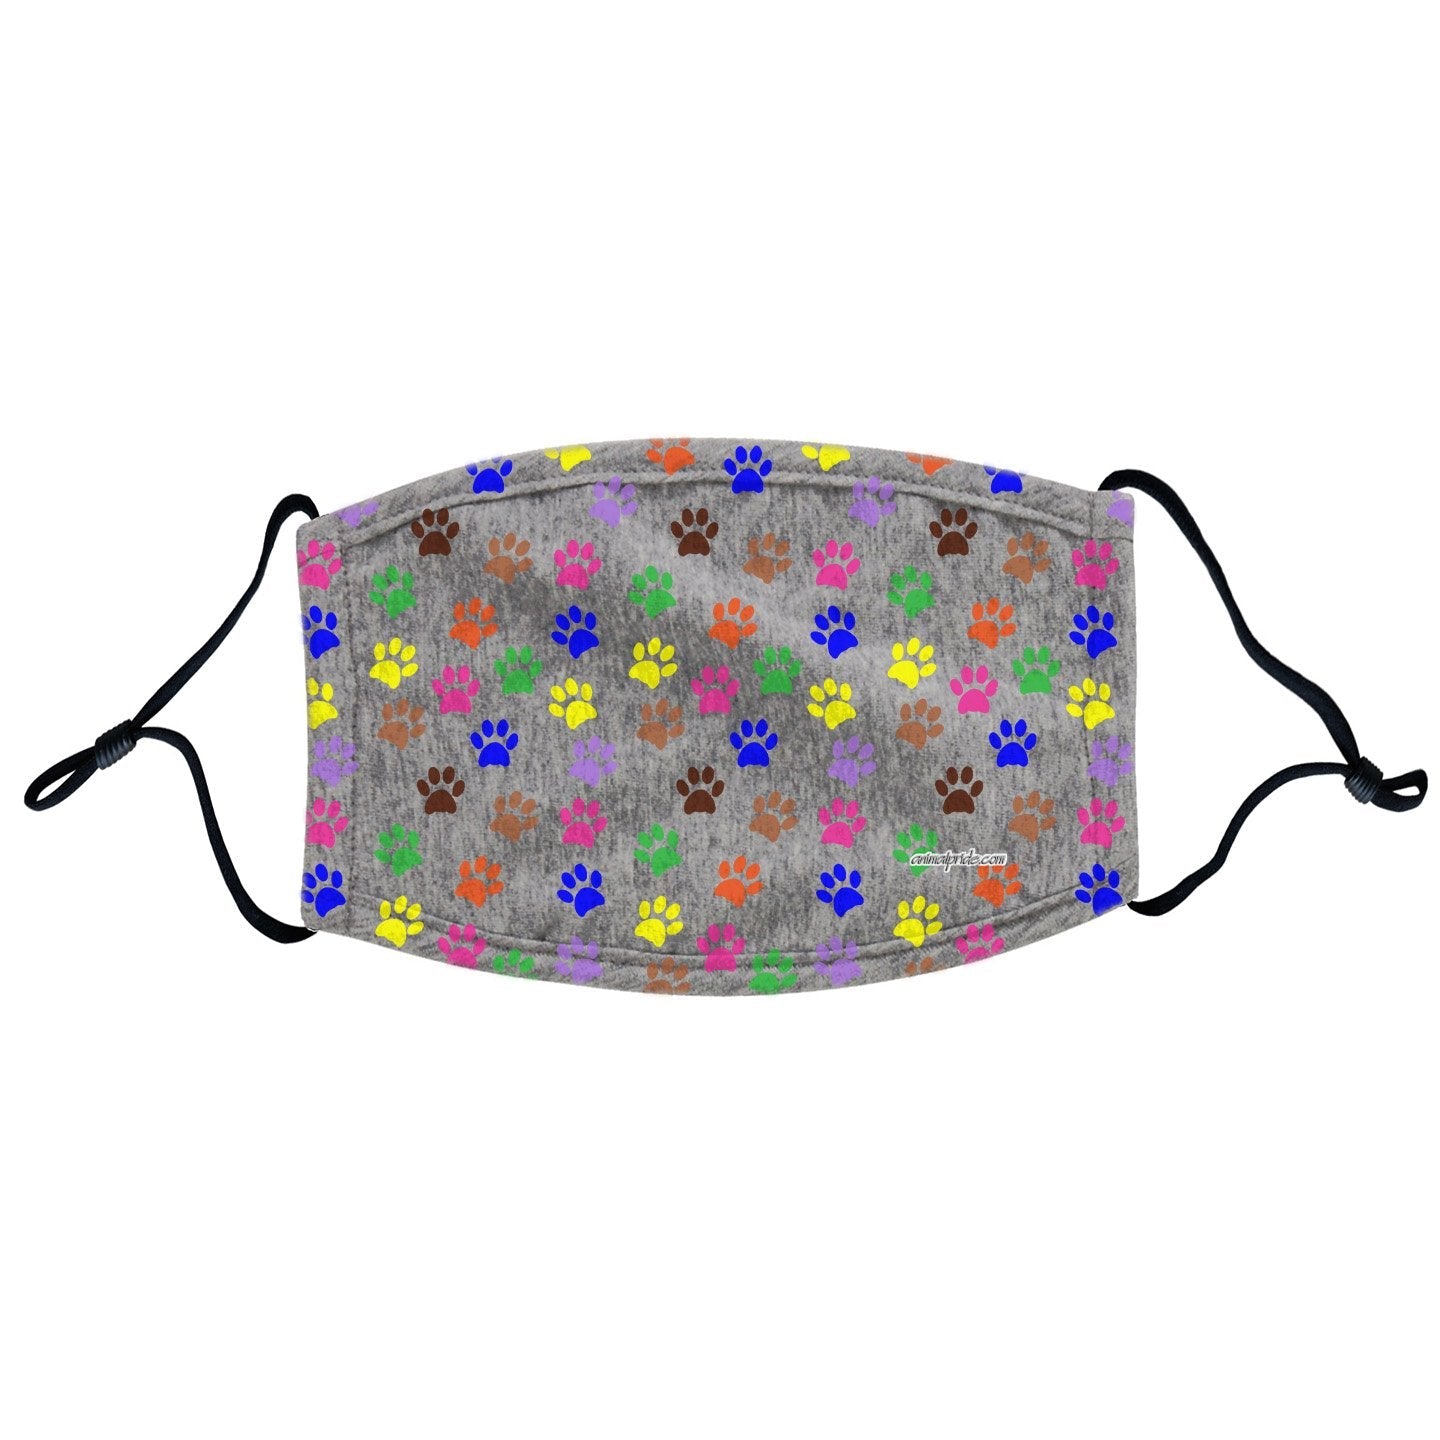 Colorful Paw Prints - Adult Adjustable Face Mask